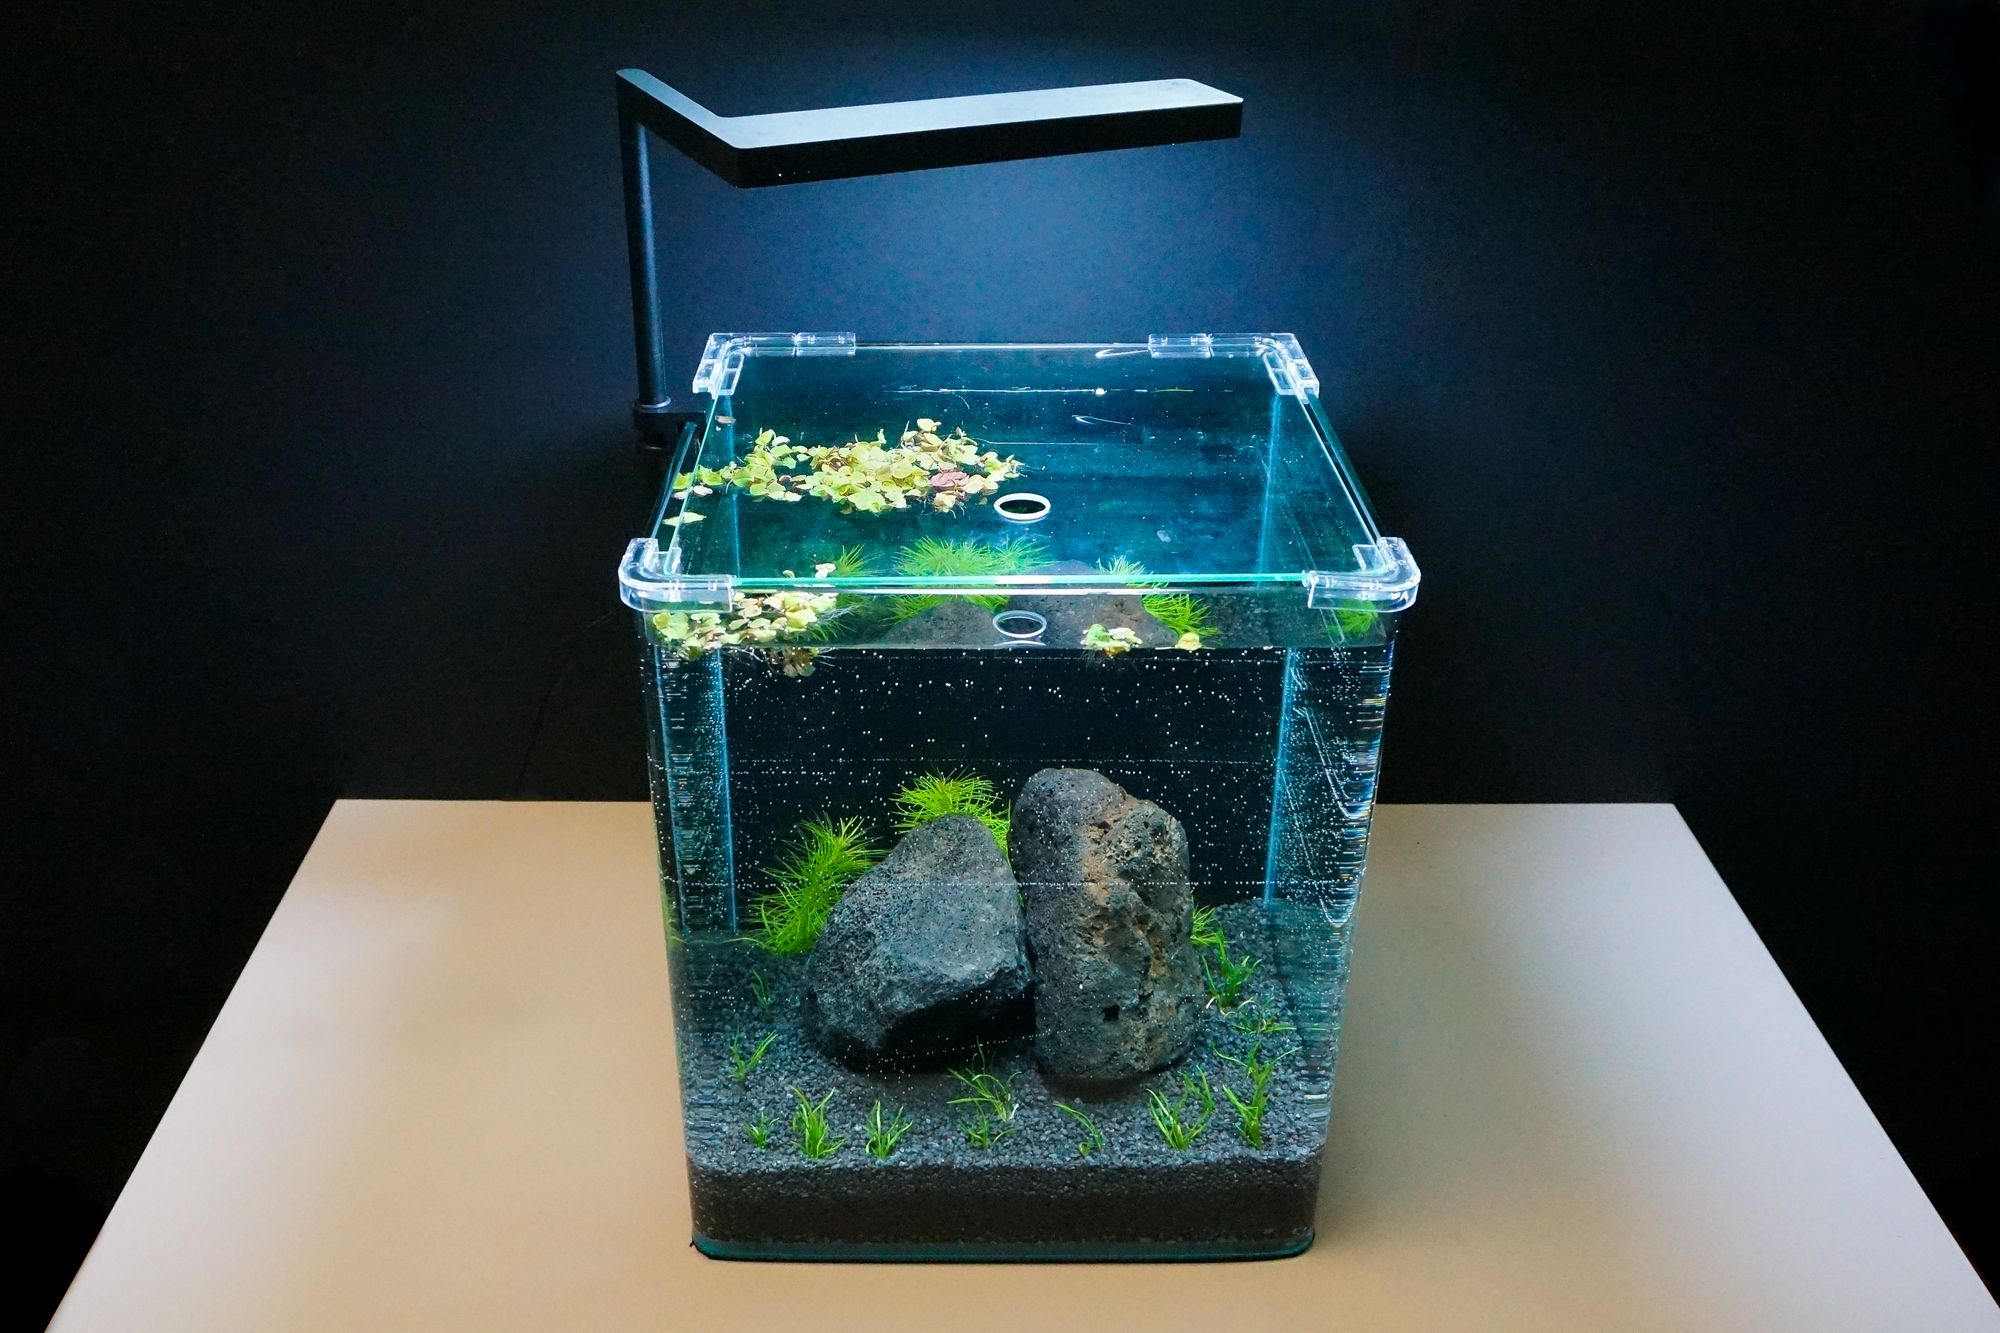 A beginner-friendly step-by-step guide on how to create a no-filter nano shrimp tank including materials and common mistakes